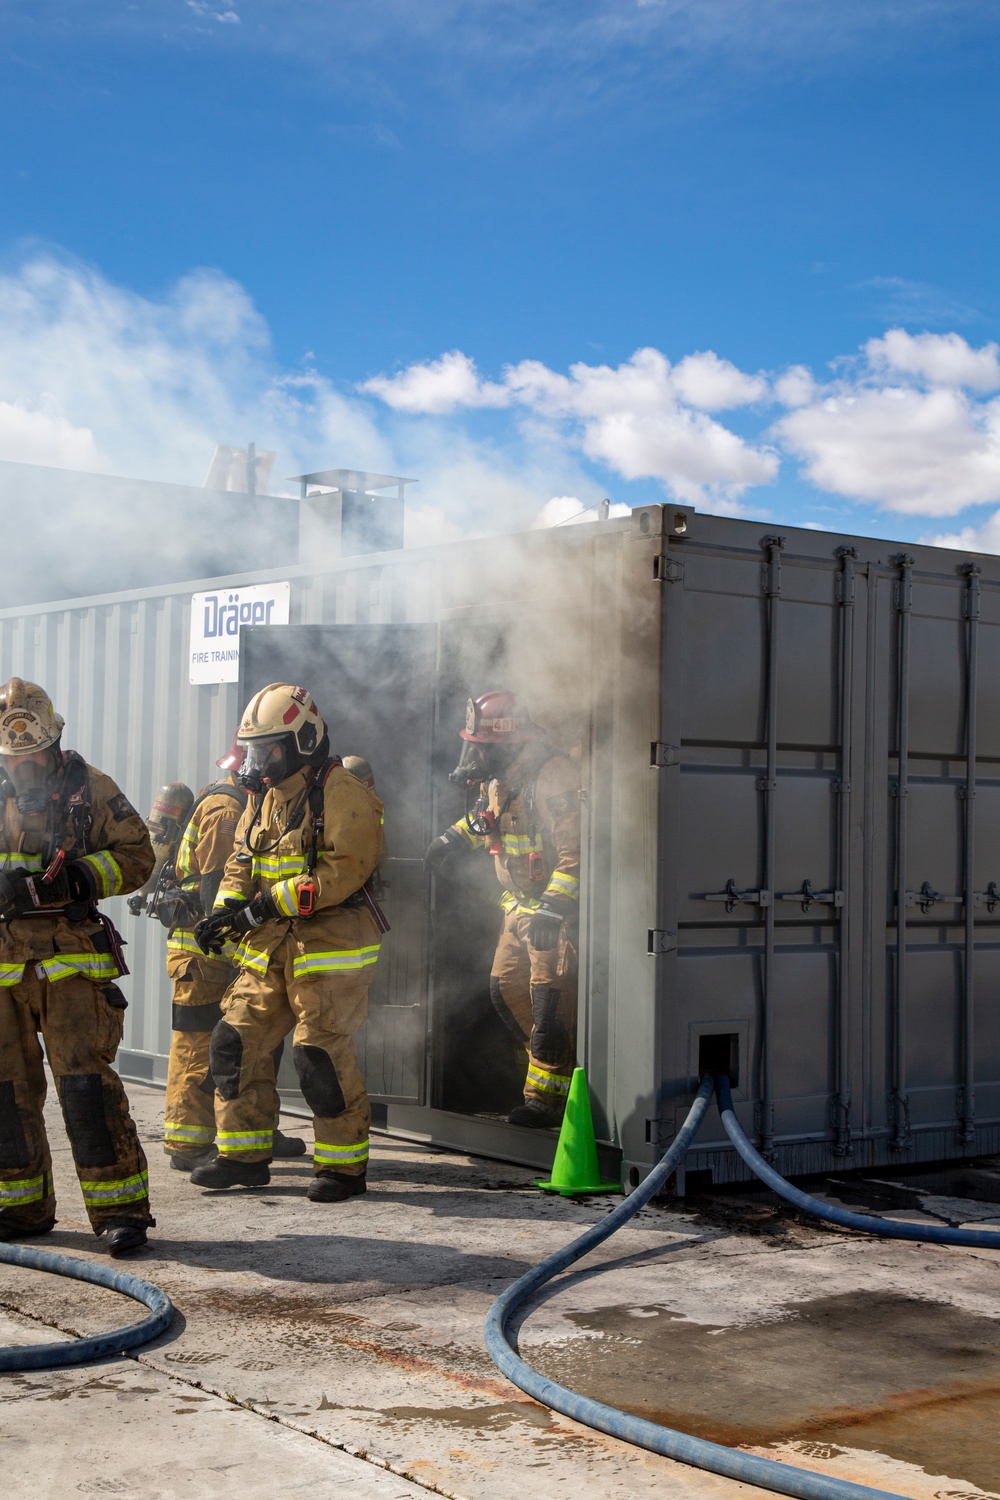 Firefighters Train with Drager System